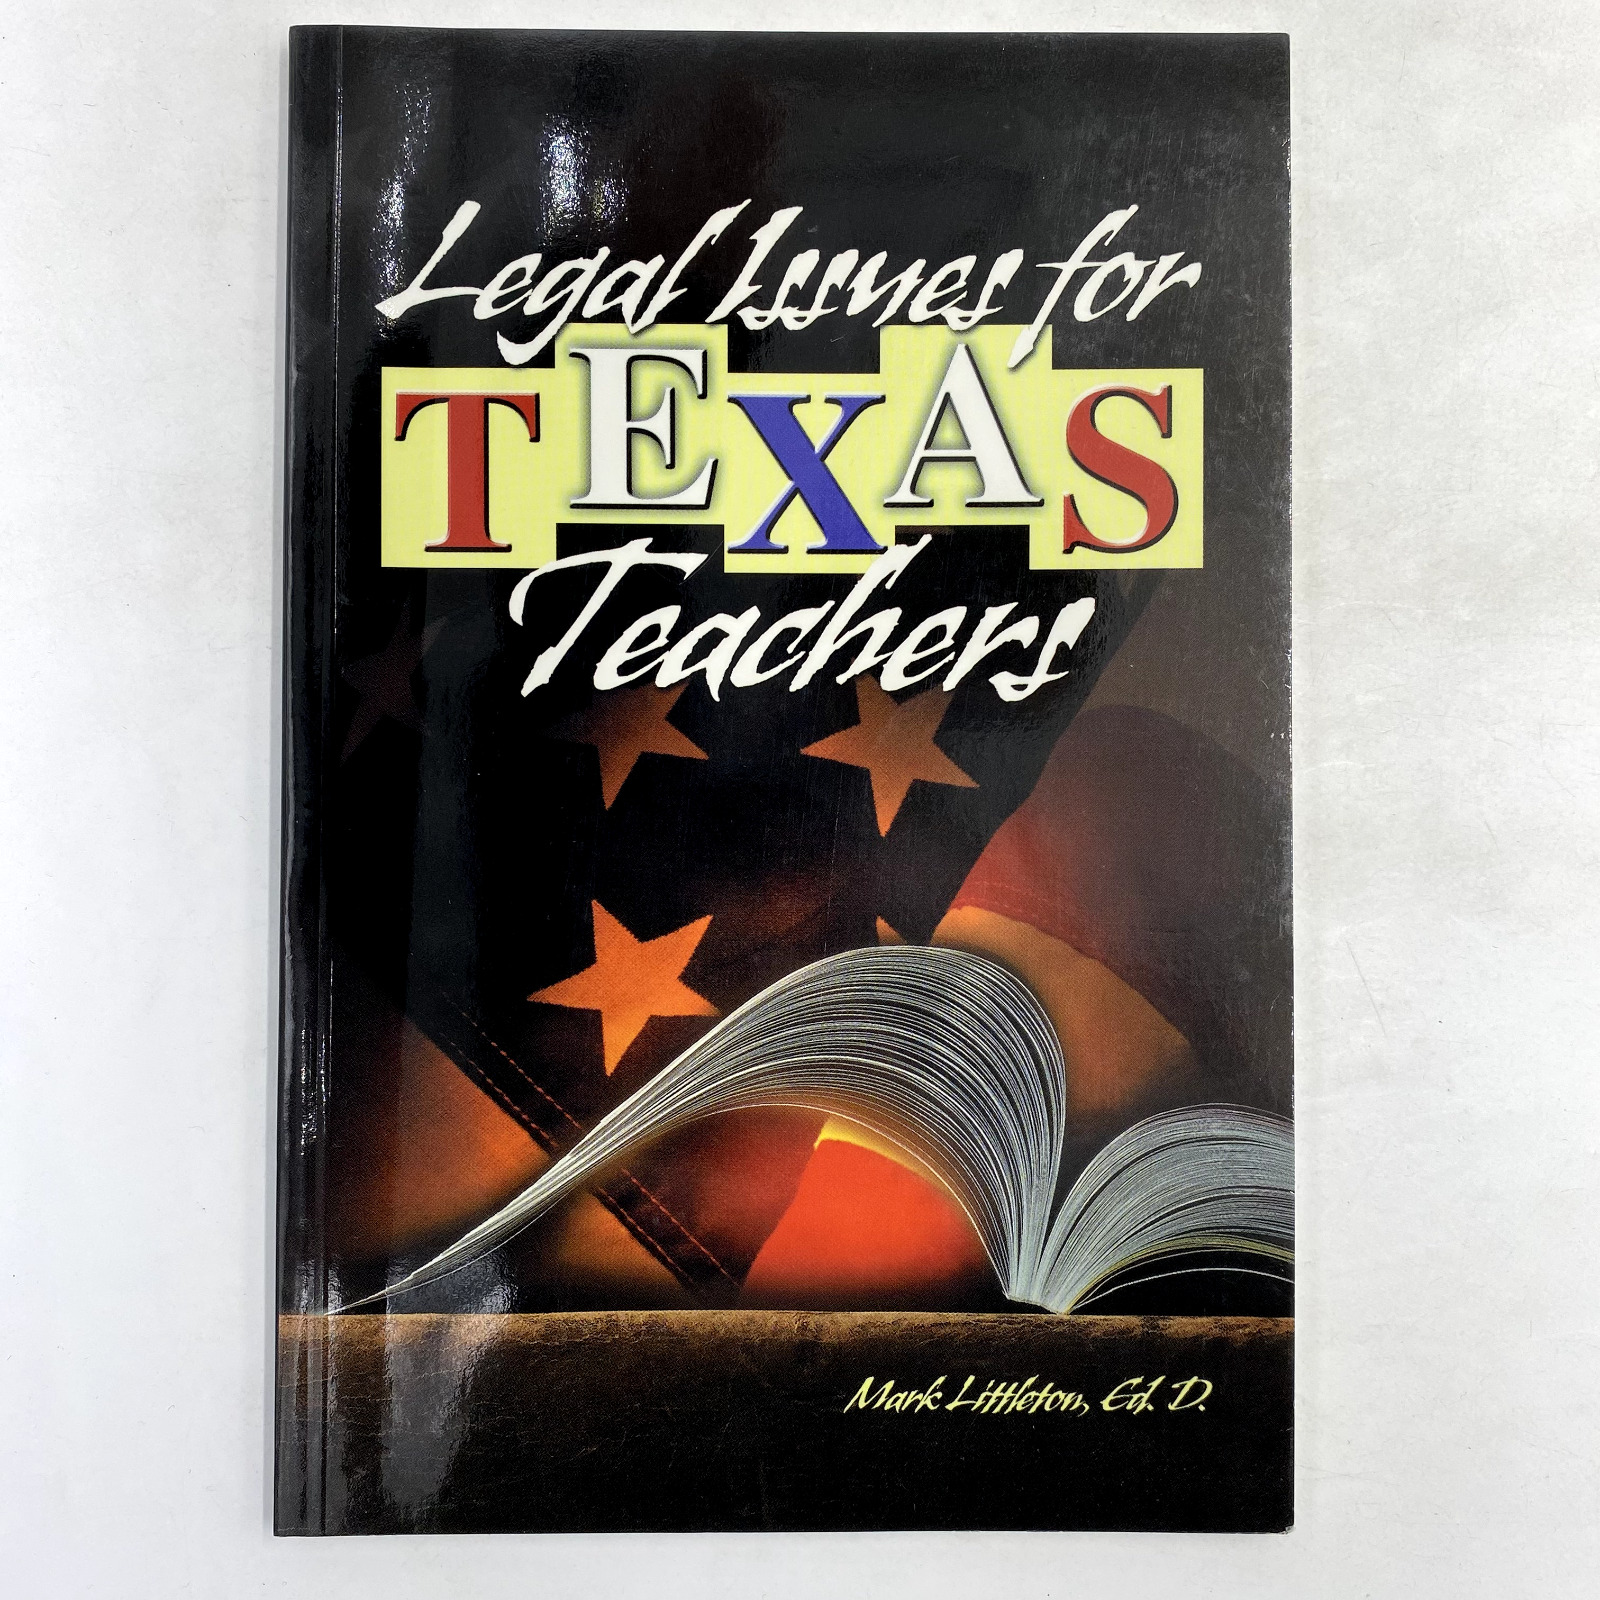 Legal Issues for Texas Teachers by Mark Littleton (2001, Perfect, Revised...